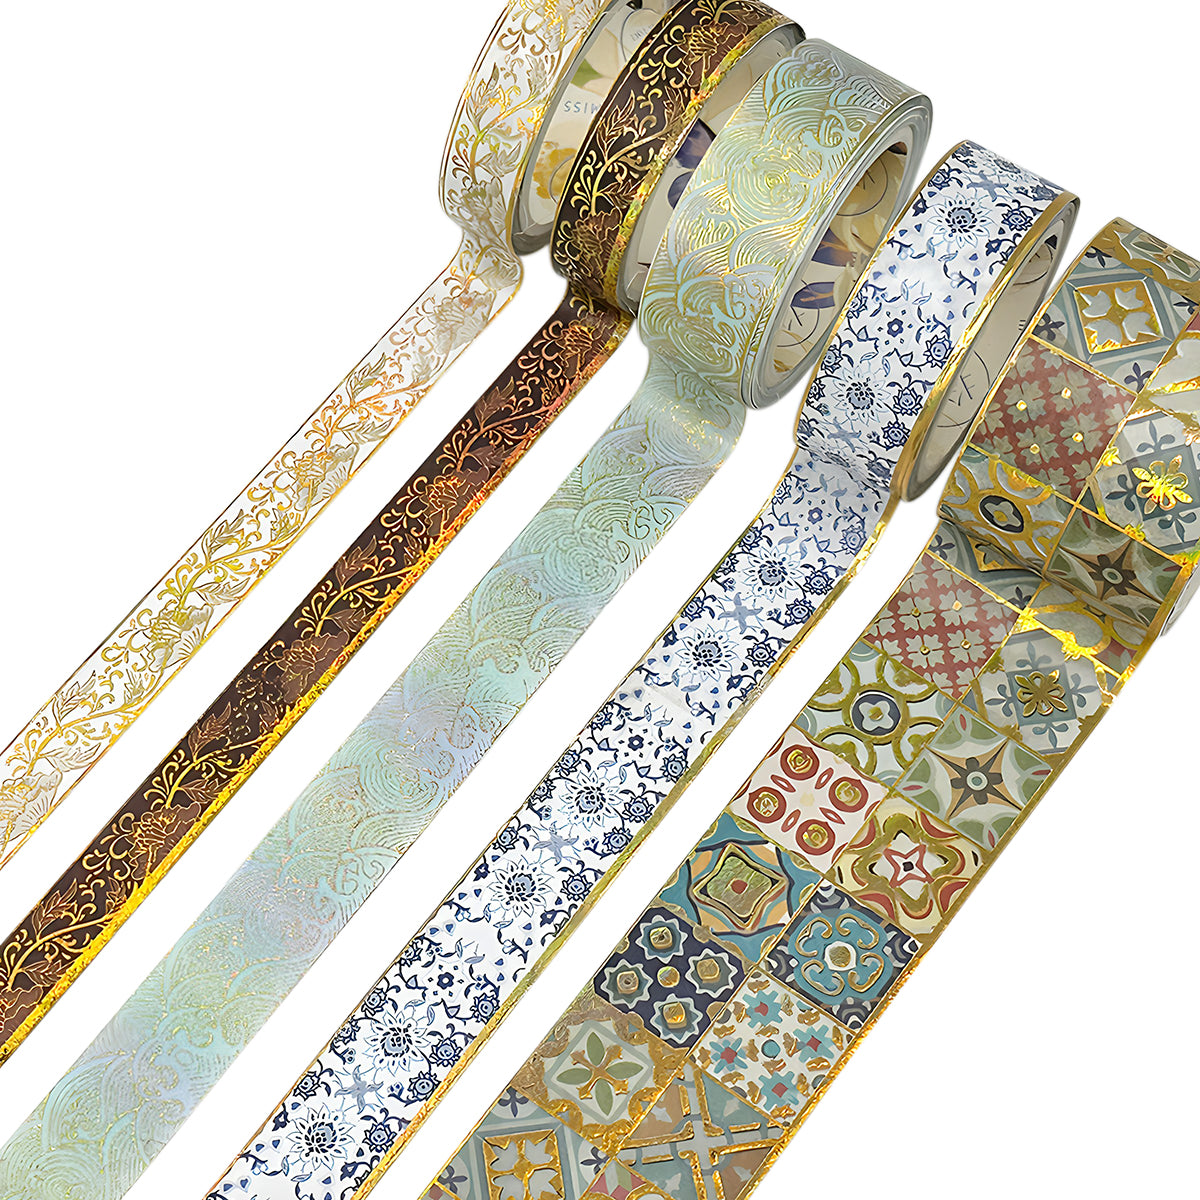 Gold Triangle Washi Tape in metallic trendy print | Gift Wrapping and Craft  Tape